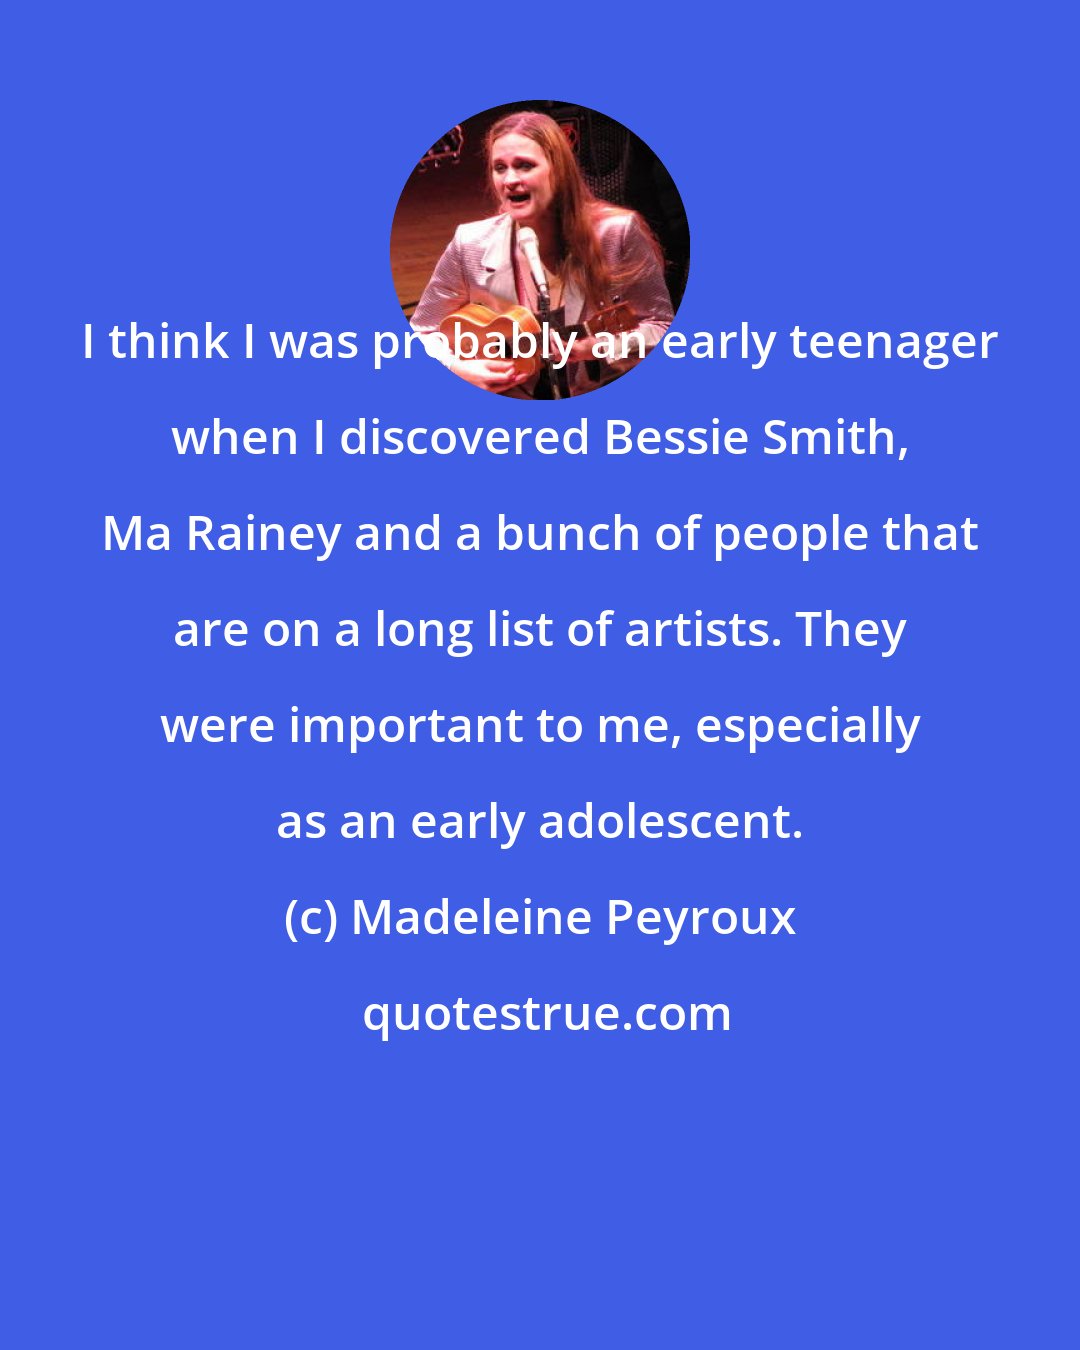 Madeleine Peyroux: I think I was probably an early teenager when I discovered Bessie Smith, Ma Rainey and a bunch of people that are on a long list of artists. They were important to me, especially as an early adolescent.